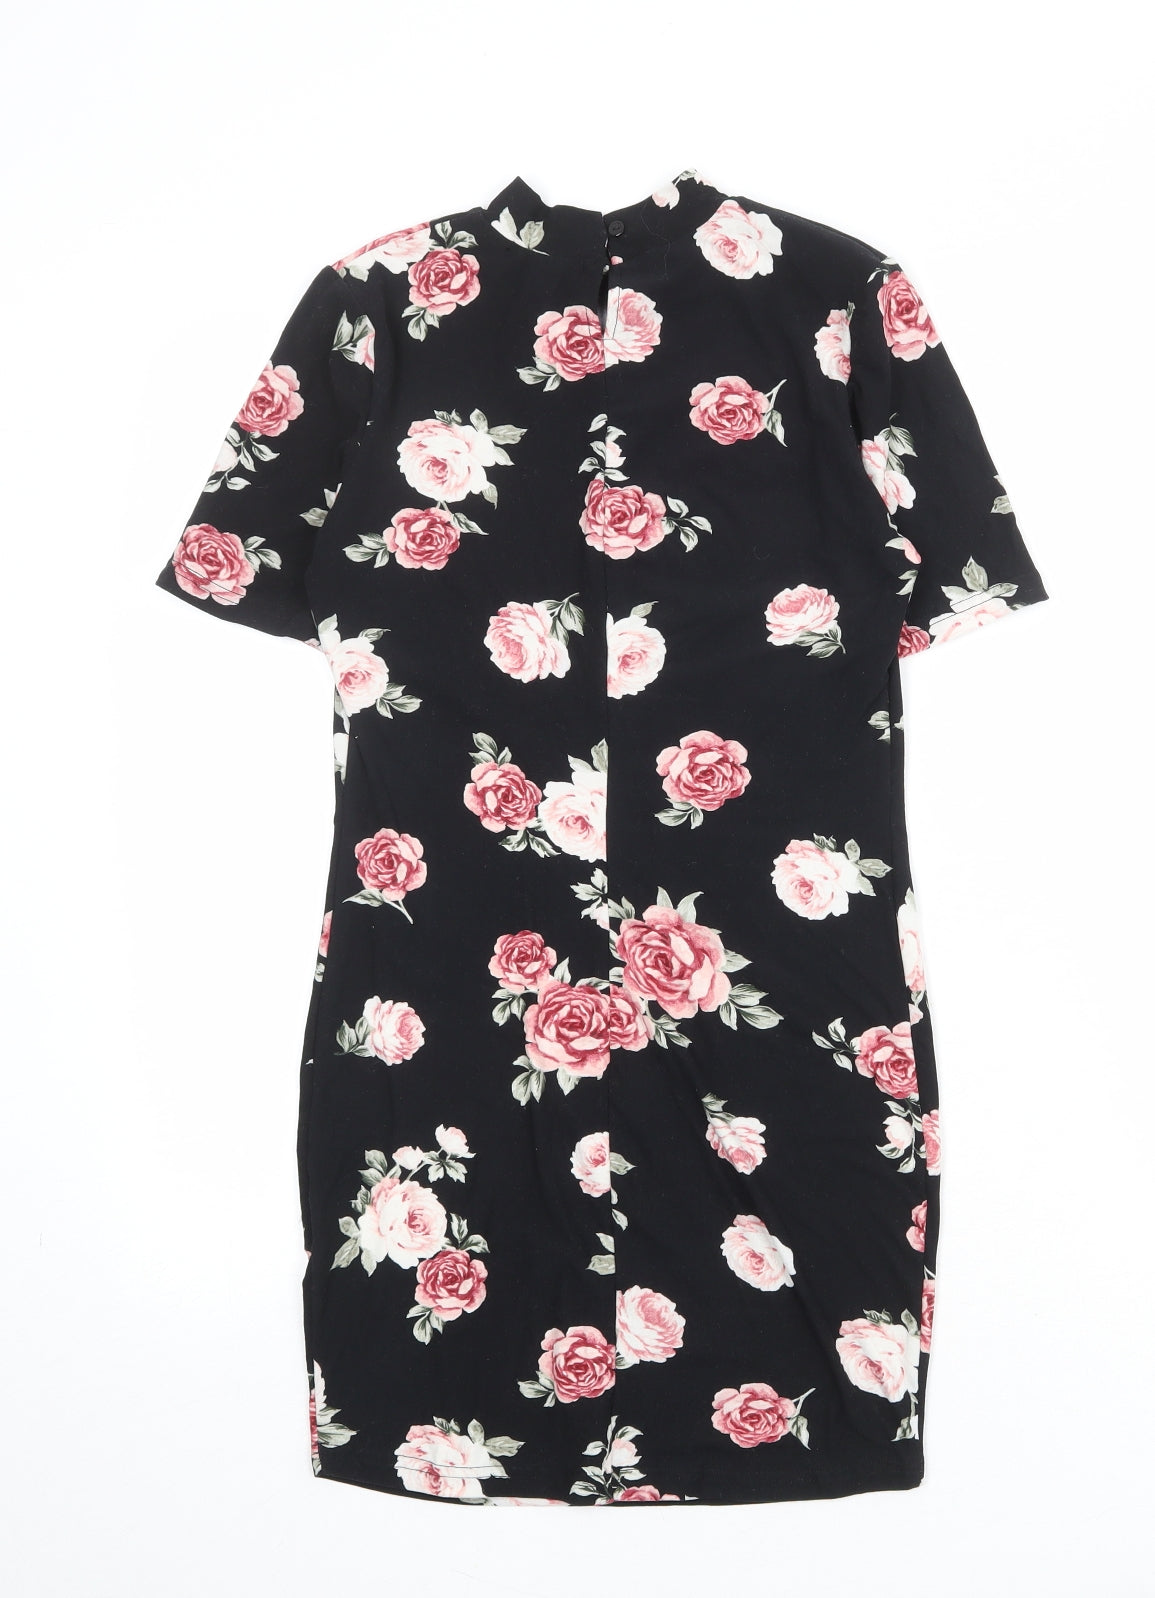 New Look Girls Black Floral Polyester T-Shirt Dress Size 10-11 Years Mock Neck Pullover